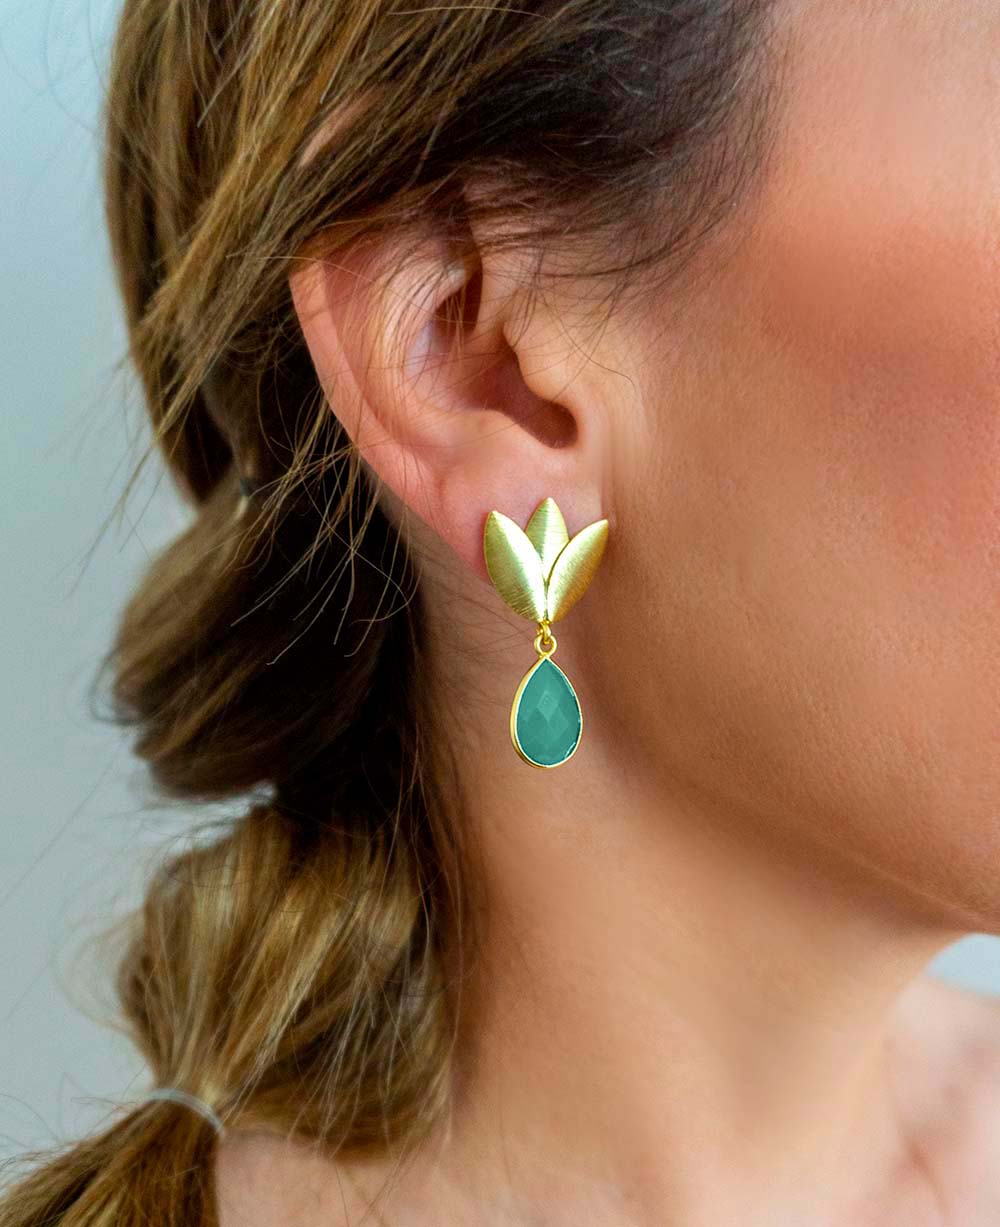 Earrings with Natural Stones Lilium Chalcedony Aqua in Sterling Silver with 18 kt Gold plating